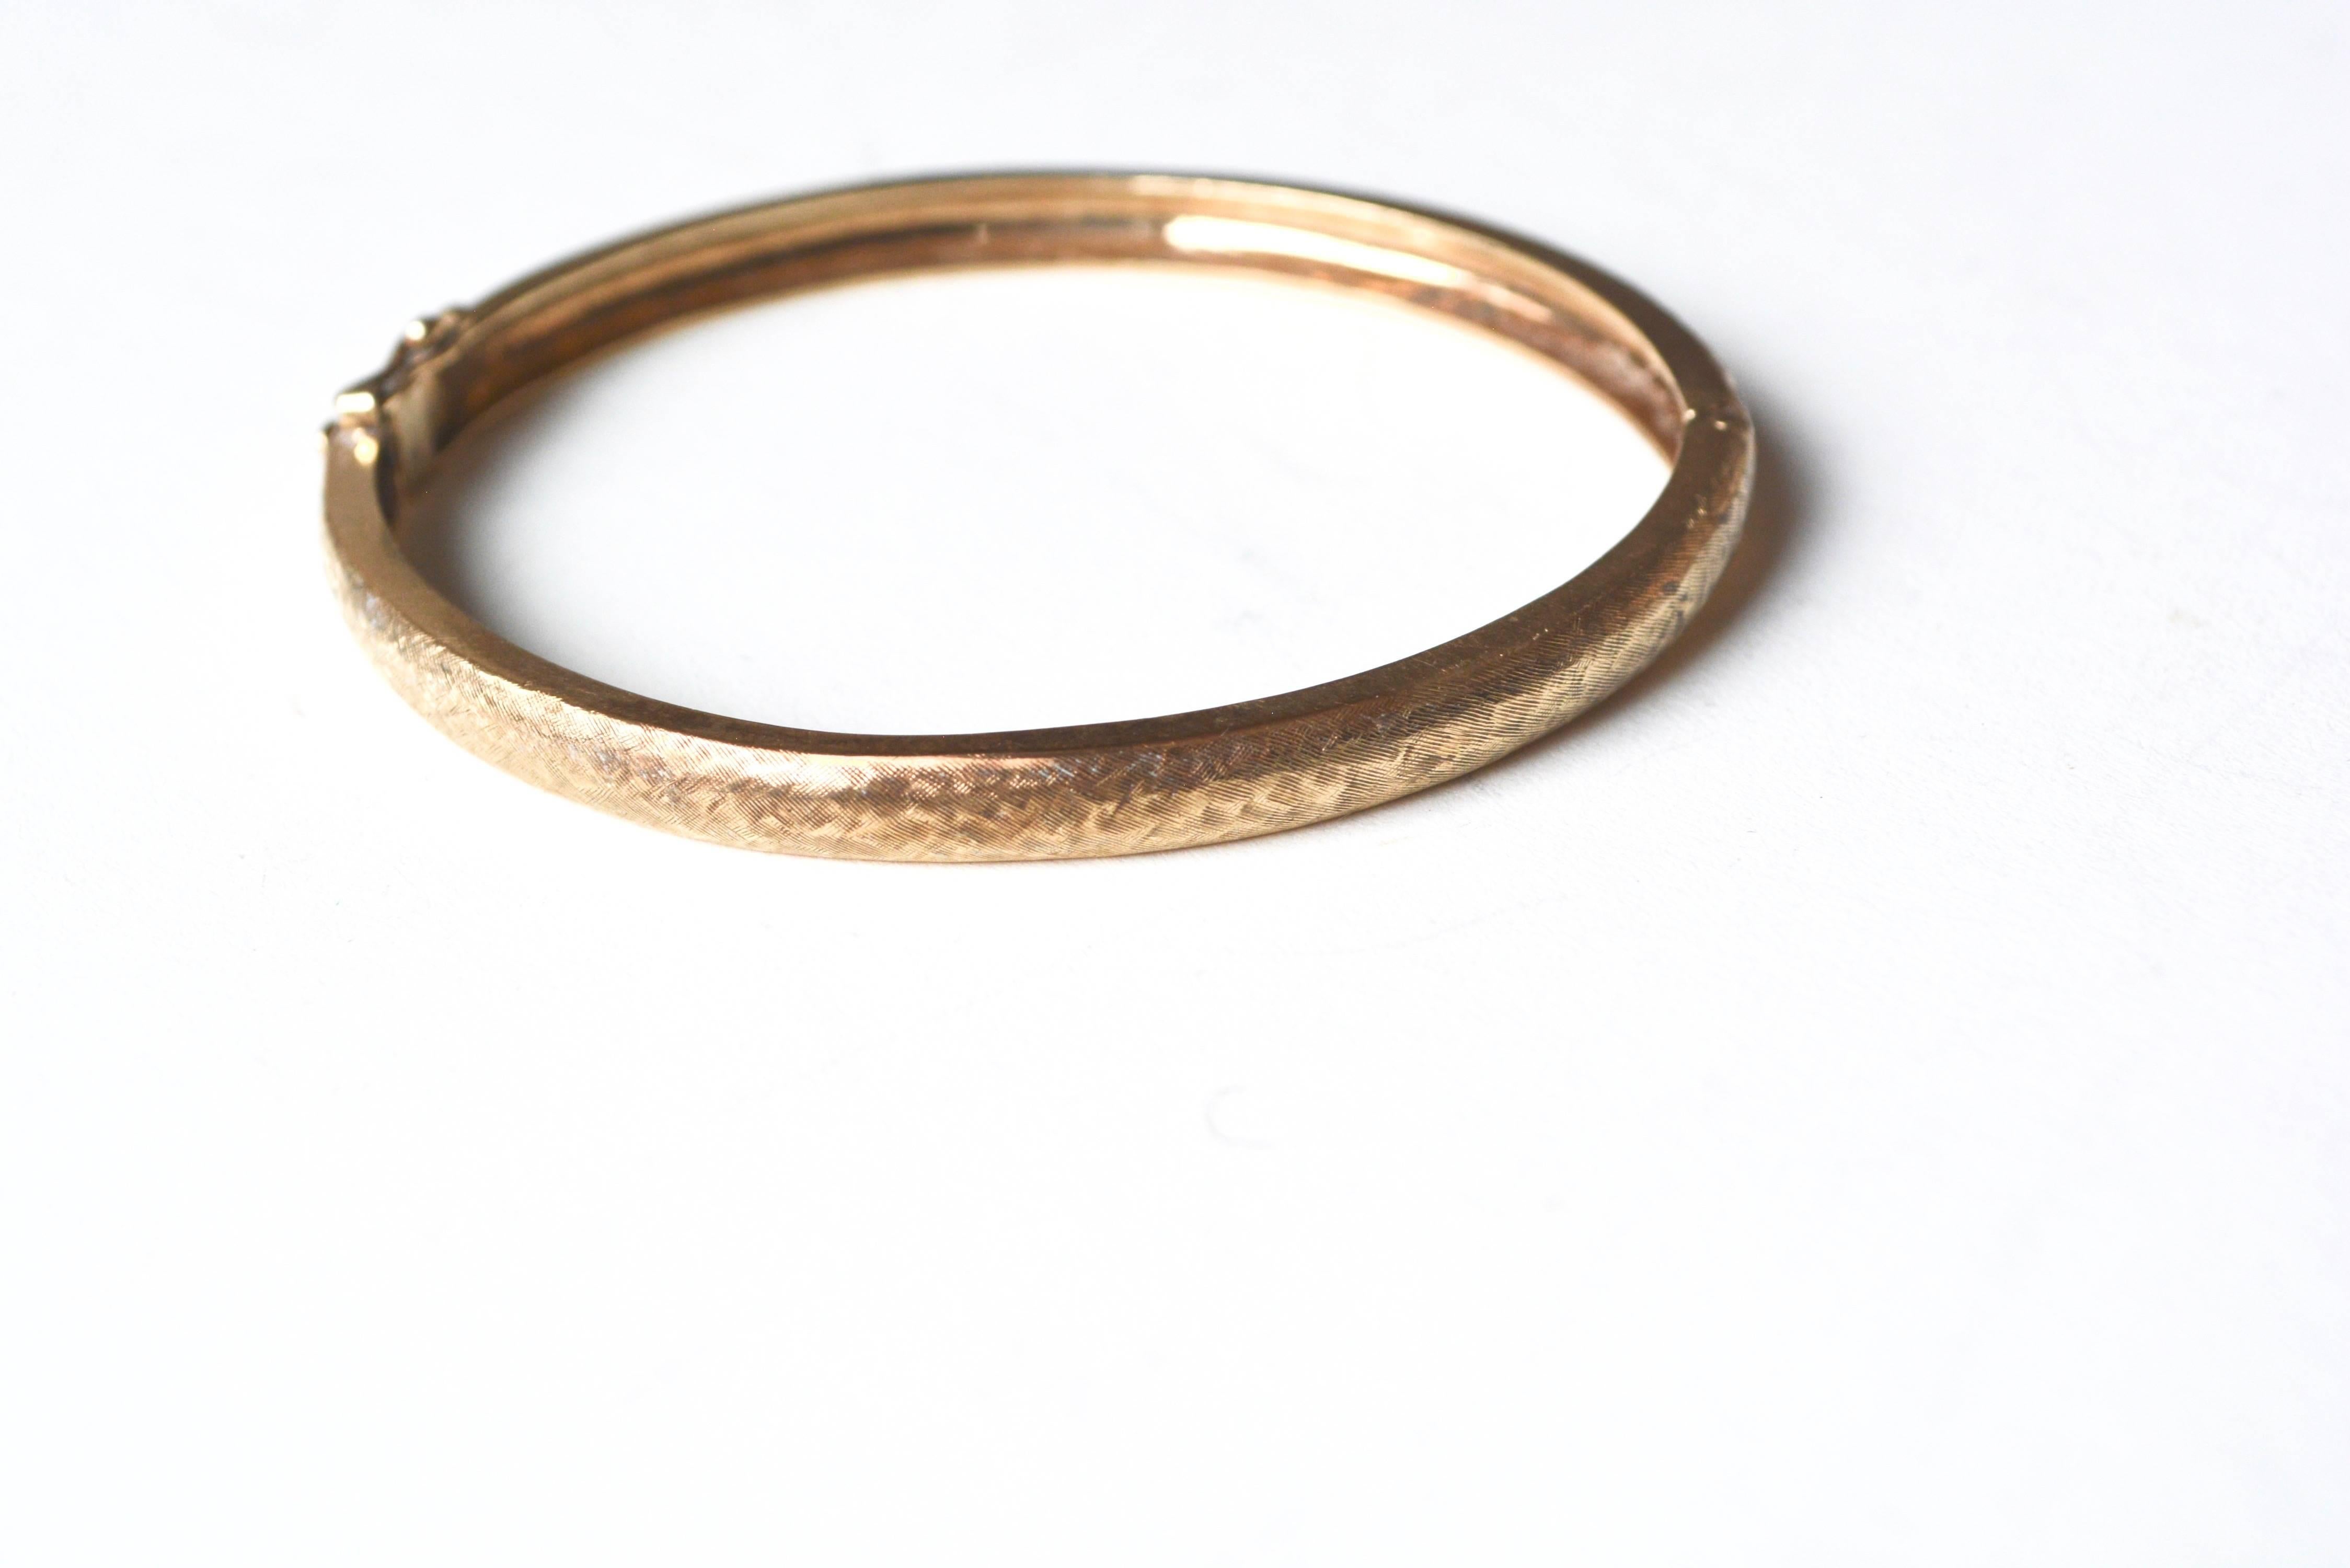 Textured stackable 1970s 14k gold bangle with latch style closure. Not marked, tested. Good overall condition. About 7